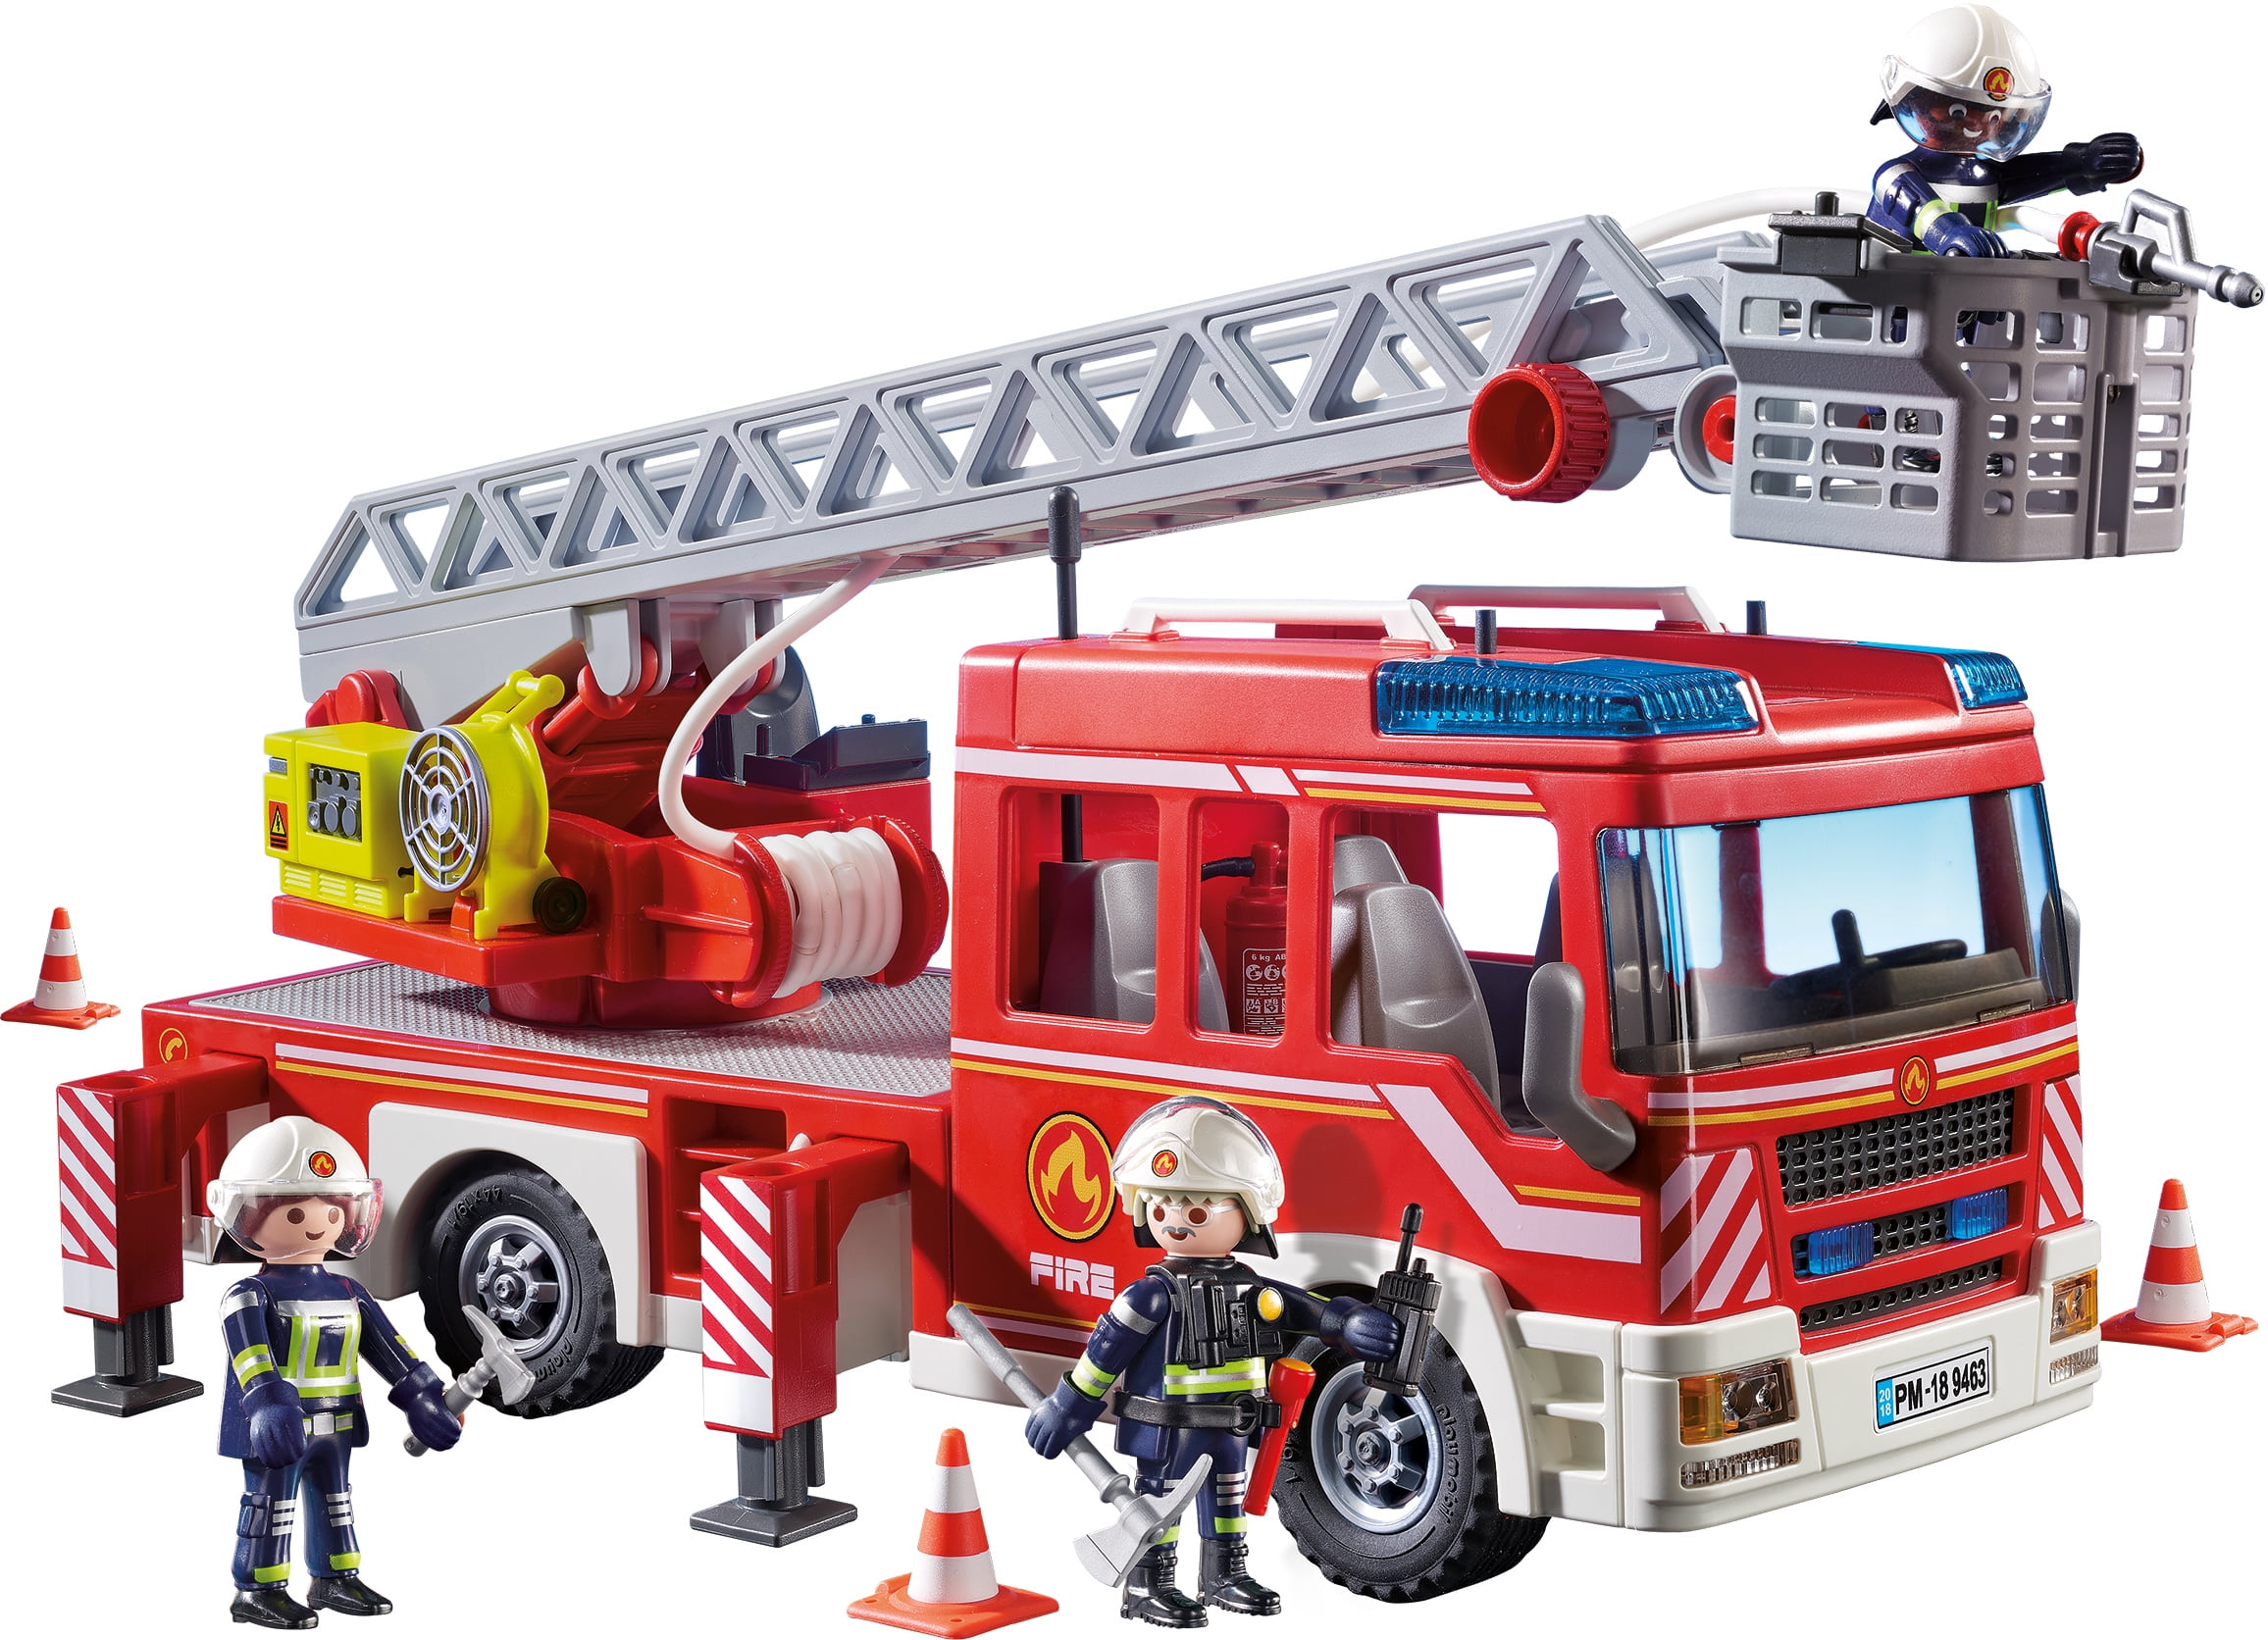 PLAYMOBIL 5362 City Action Fire Ladder Unit with Lights & Sound New sealed OOP 